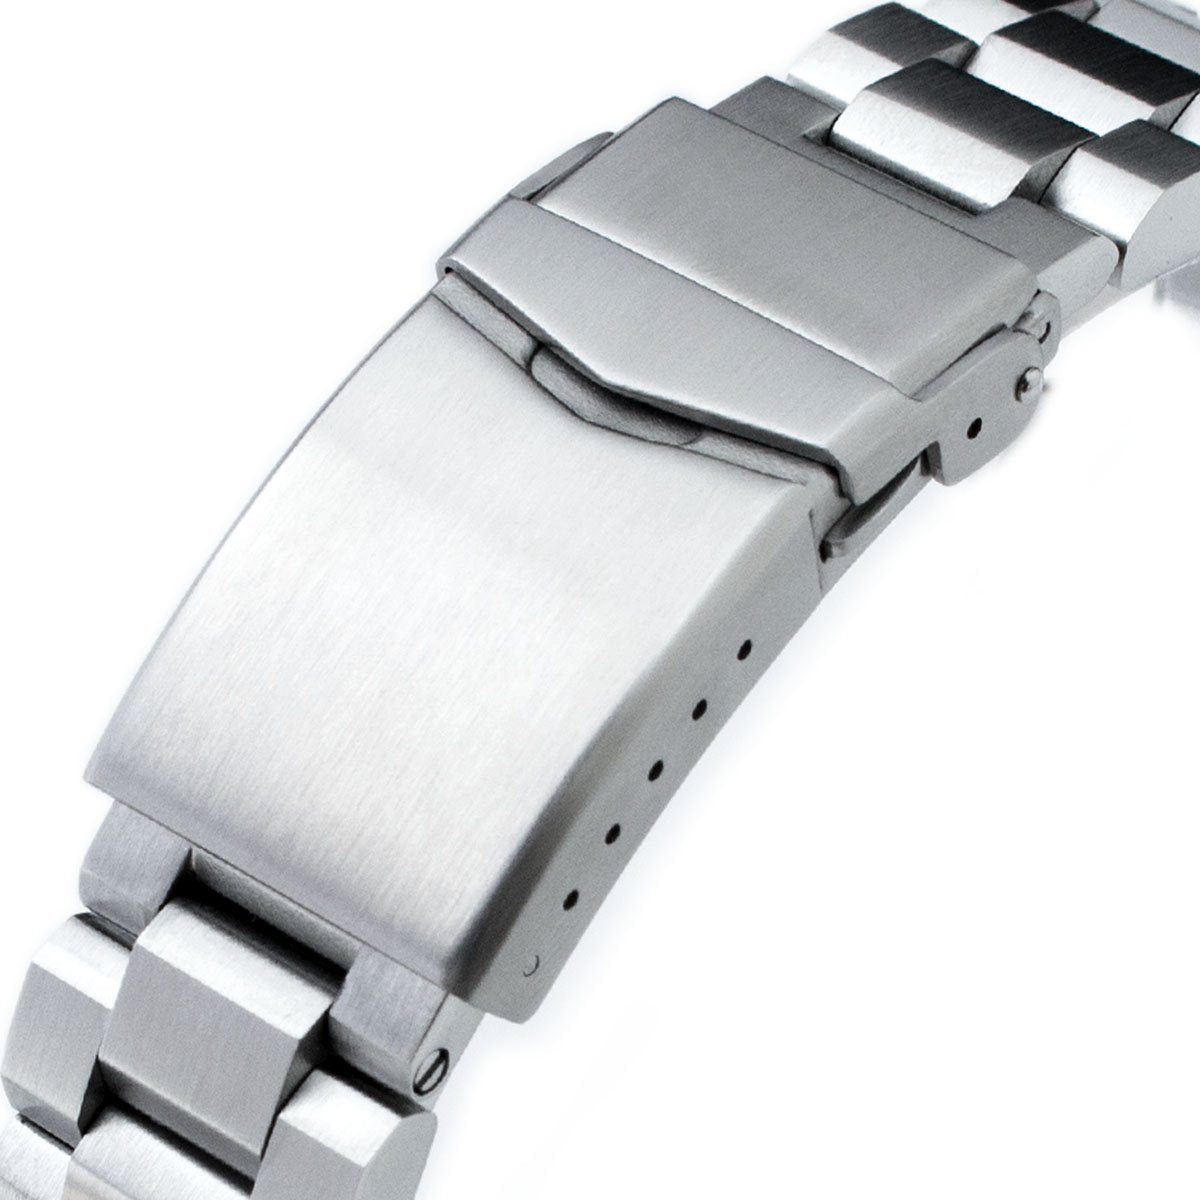 20mm Hexad 316L Stainless Steel Watch Band for Seiko Sumo SBDC001 V-Clasp Button Double Lock Strapcode Watch Bands